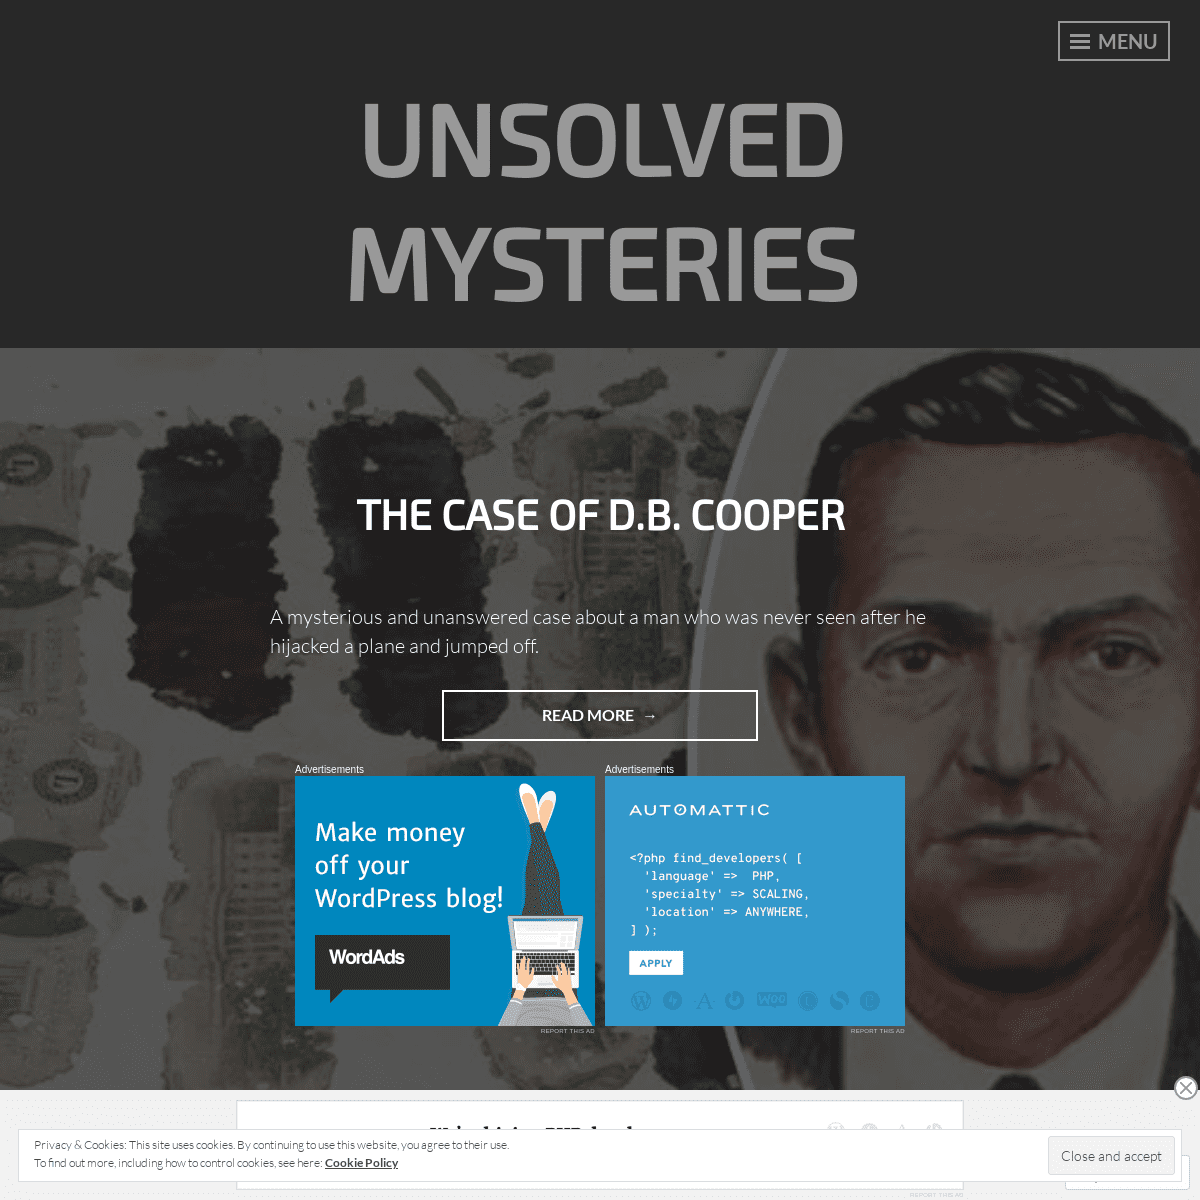 A complete backup of unsolvedmysteries773.wordpress.com